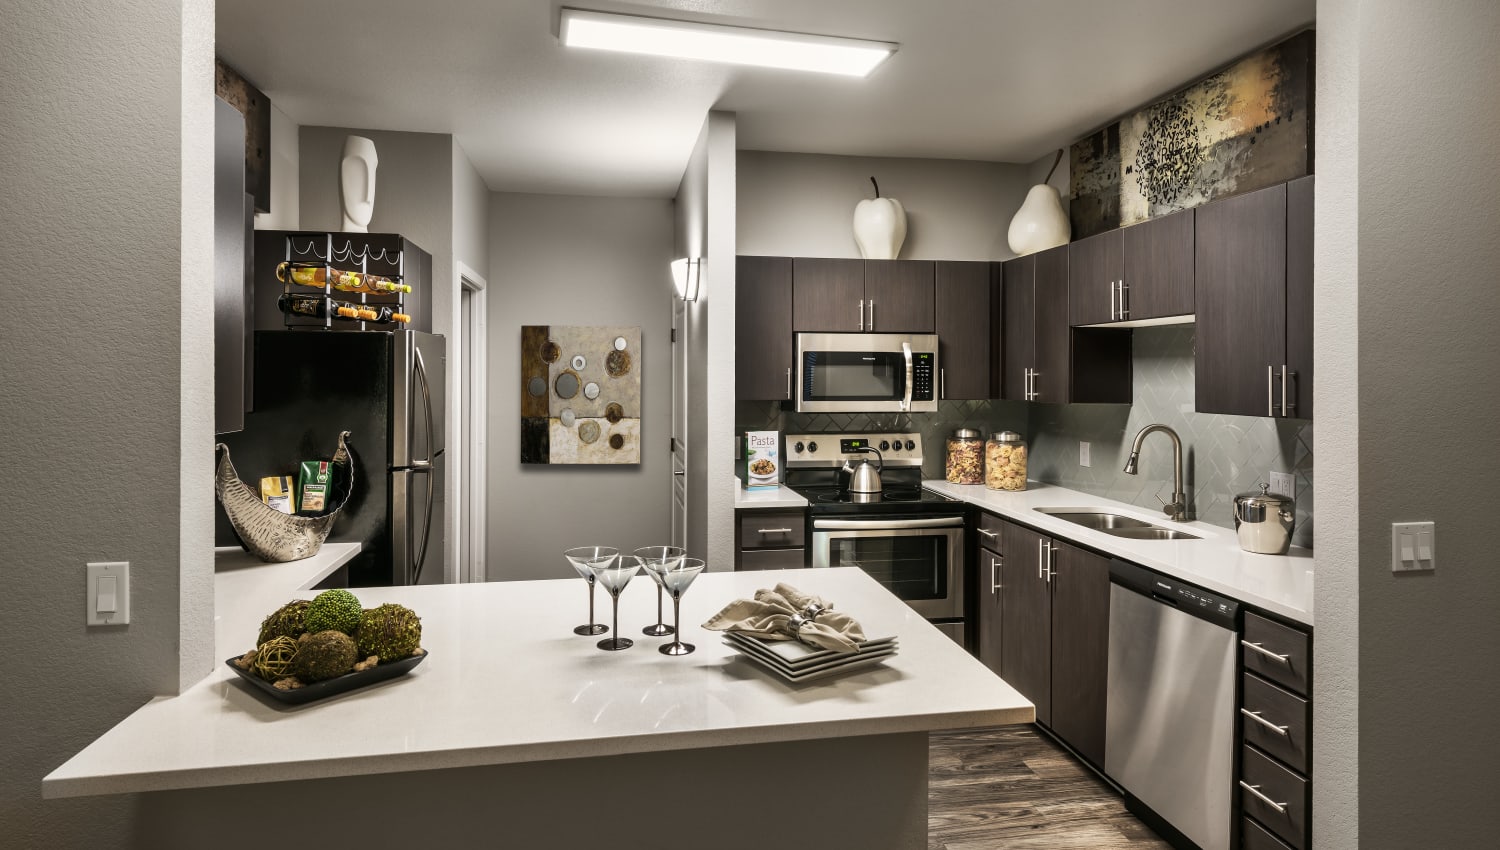 Gourmet kitchen with stainless-steel appliances at Avenue 25 in Phoenix, Arizona